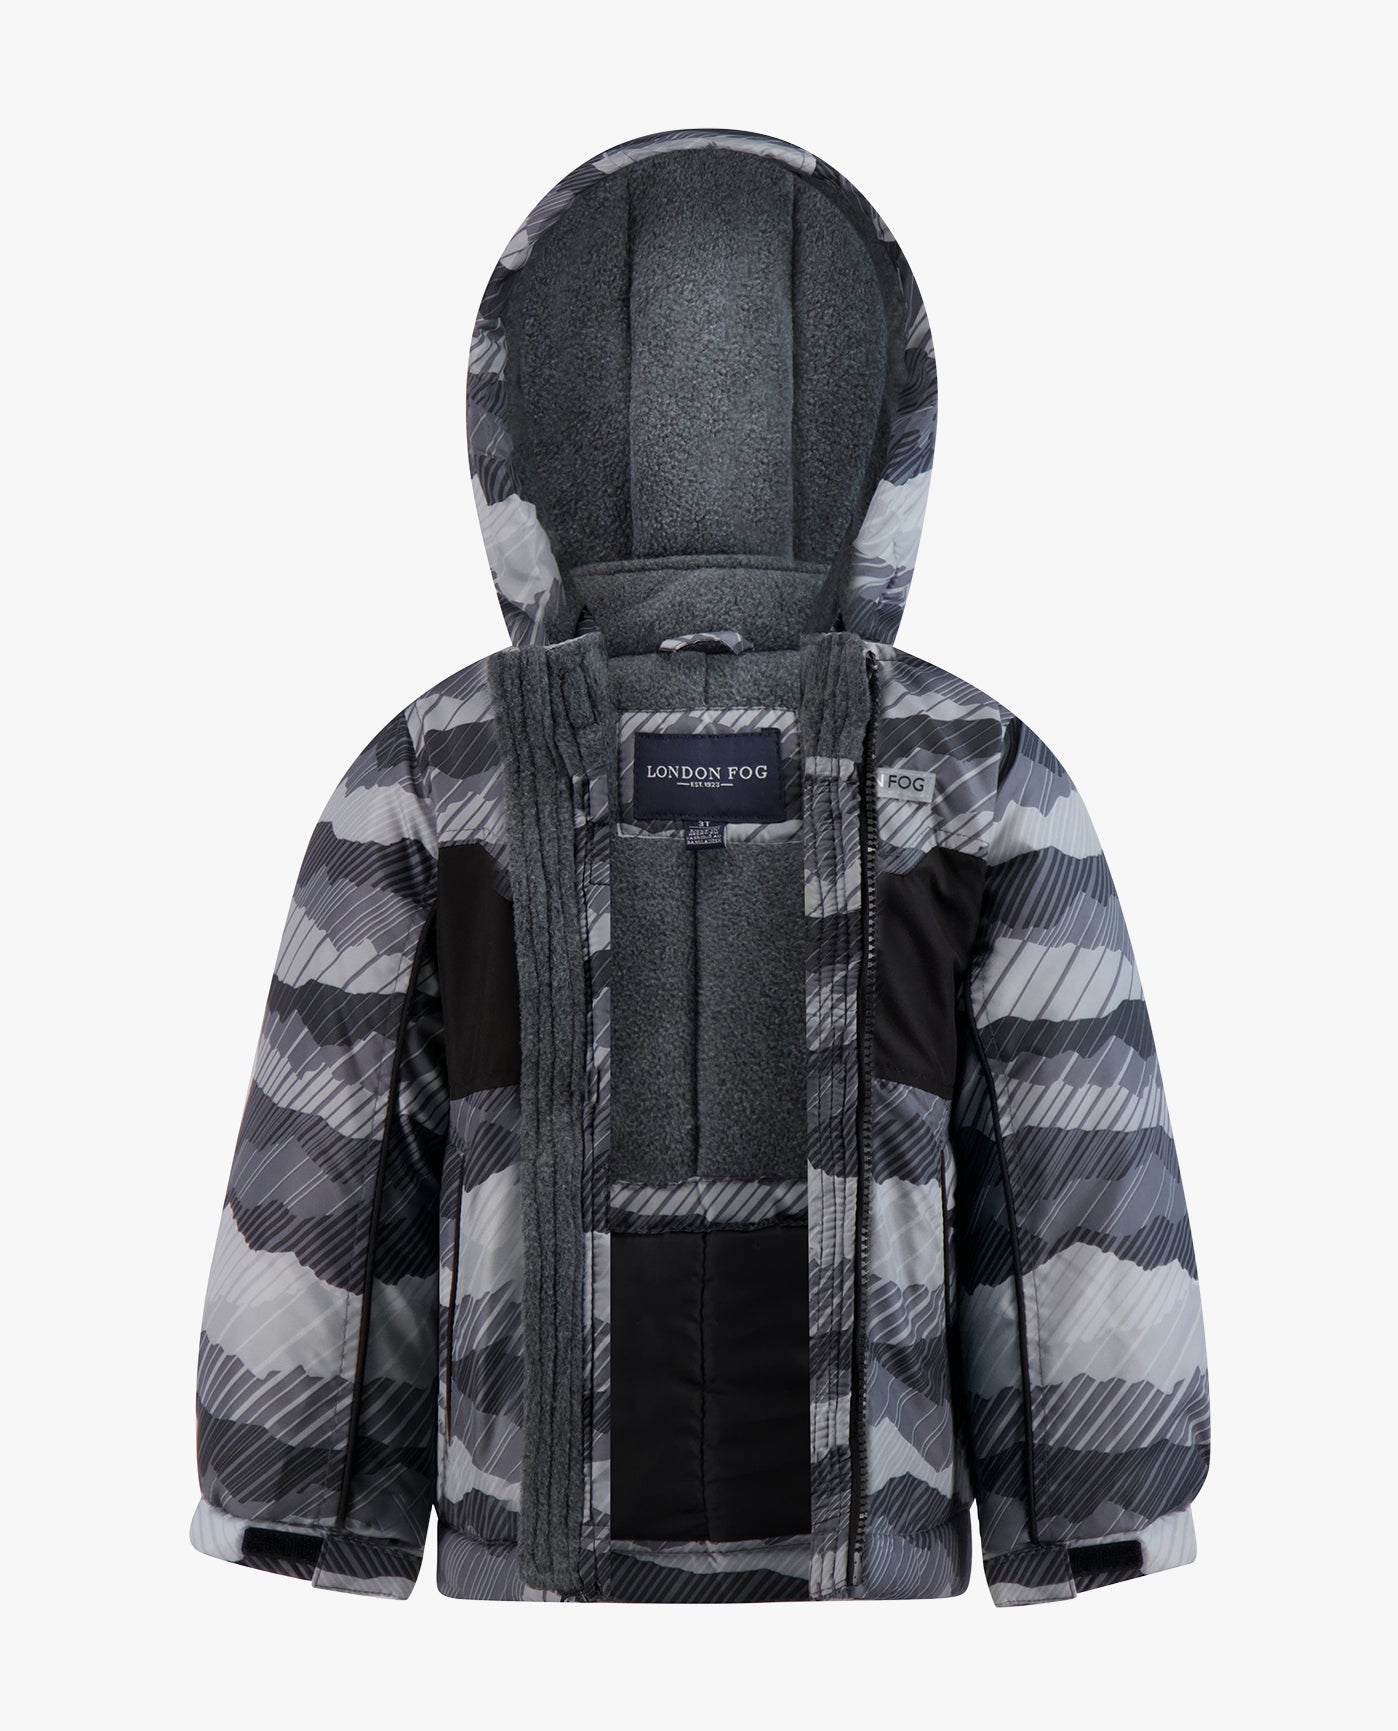 OPEN VIEW OF TODDLER BOYS ZIP-FRONT HOODED JACKET WITH OVERALL SNOW PANT | GREY PRINT